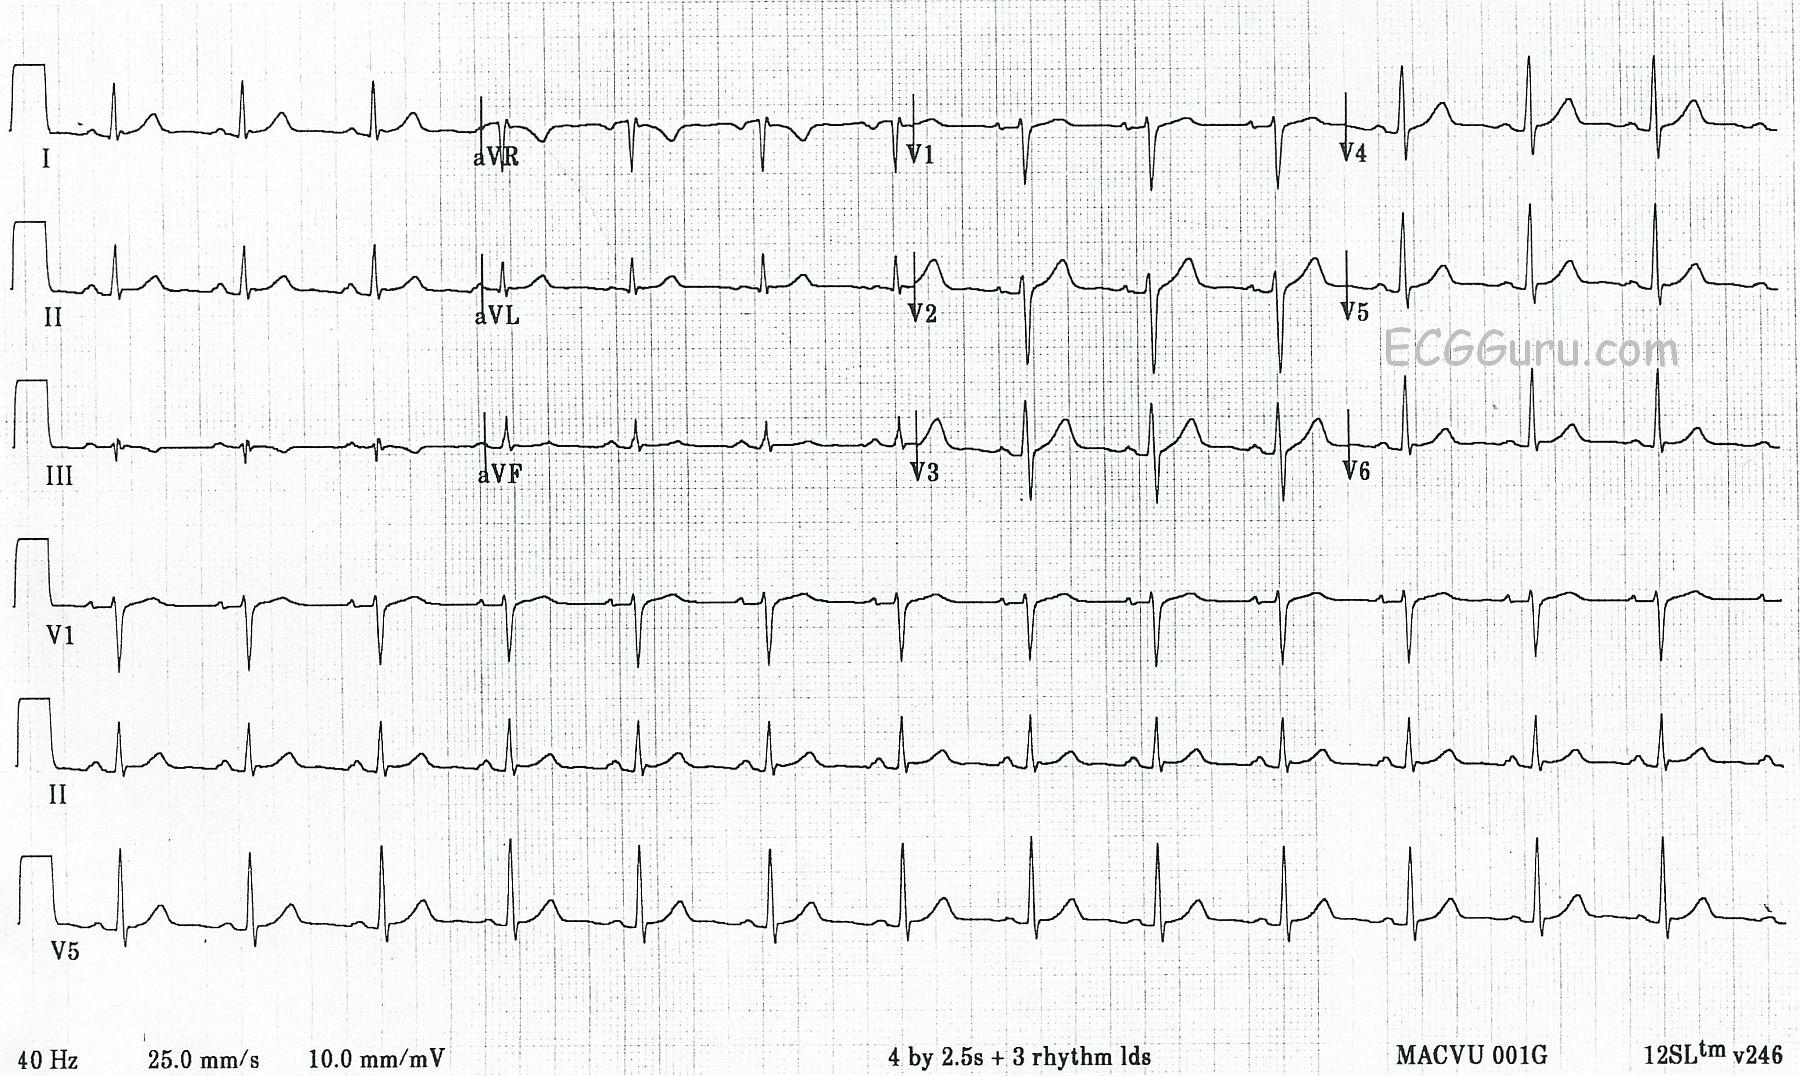 12 Lead Ecg Depicting Reversal Of V1 And V6 A Ecg Recording B All In